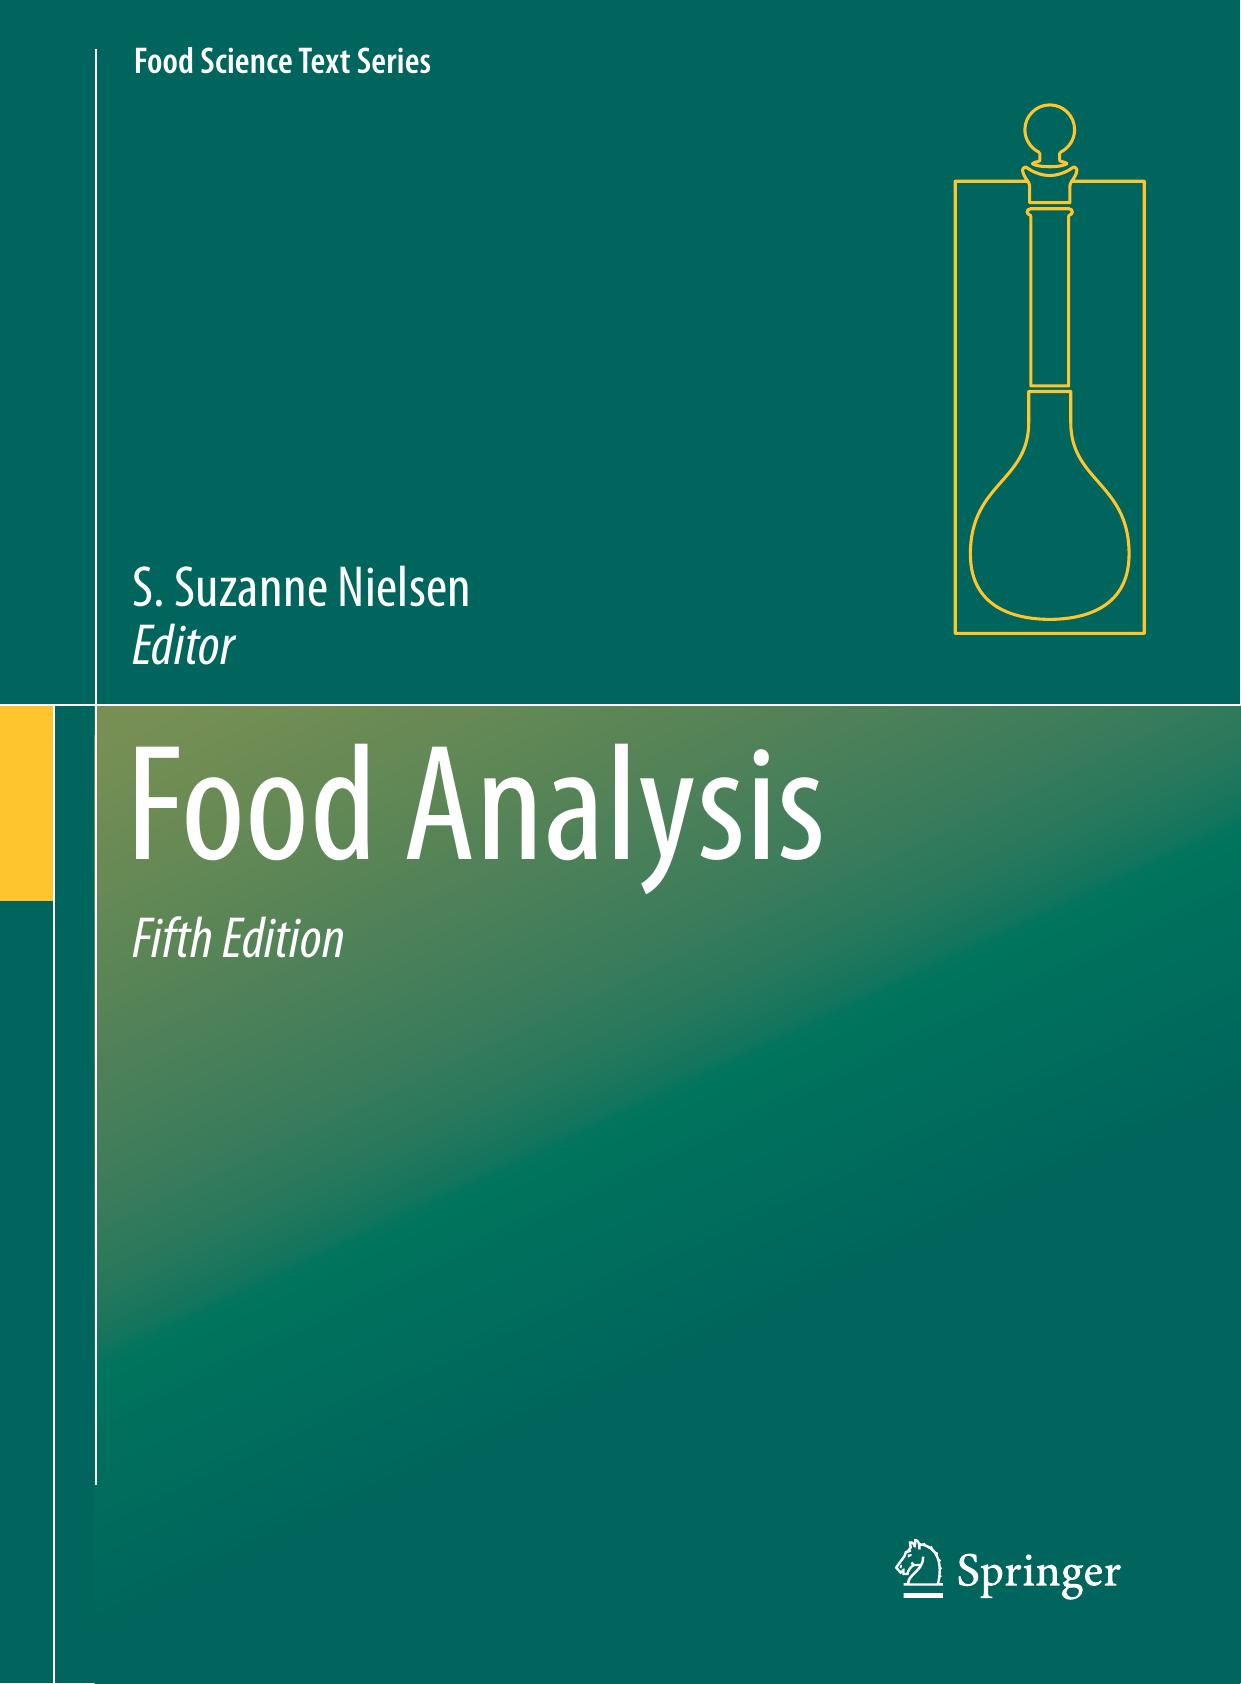 Food Analysis by S. Suzanne Nielsen